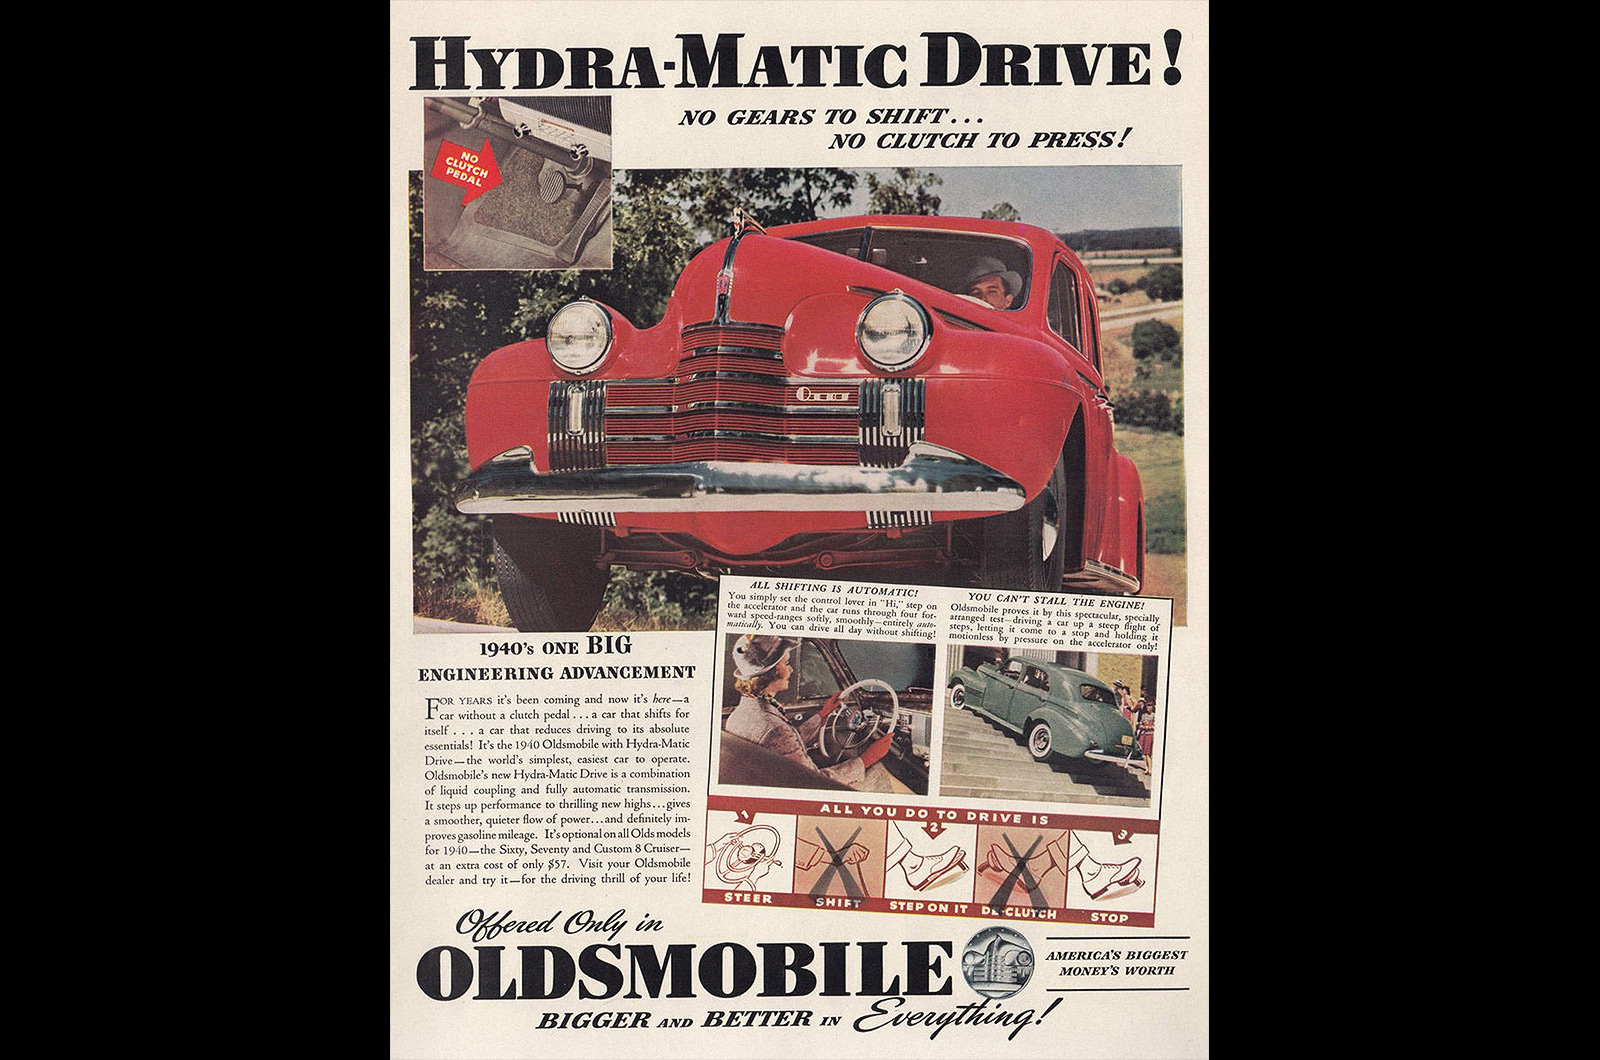 <p>The <strong>Oldsmobile Hydra-Matic</strong> of 1939 was enormously important. While using a manual gearbox today isn’t too much work, that wasn’t the case in the 1930s when it was something of a skillful chore. The arrival of a four-speed gearbox was a major change, and the automatic would go on to become the dominant transmission type after the Second World War in America, especially. GM's parts arms would sell the Hydra-Matic to many other car firms, including <strong>Nash</strong>, <strong>Hudson</strong>, and England's <strong>Rolls-Royce</strong>, while Oldsmobile's GM siblings quickly adopted the technology too.</p><p><strong>GROUNDBREAKER SCORE: 9 – </strong>A very notable groundbreaker indeed from General Motors.</p>